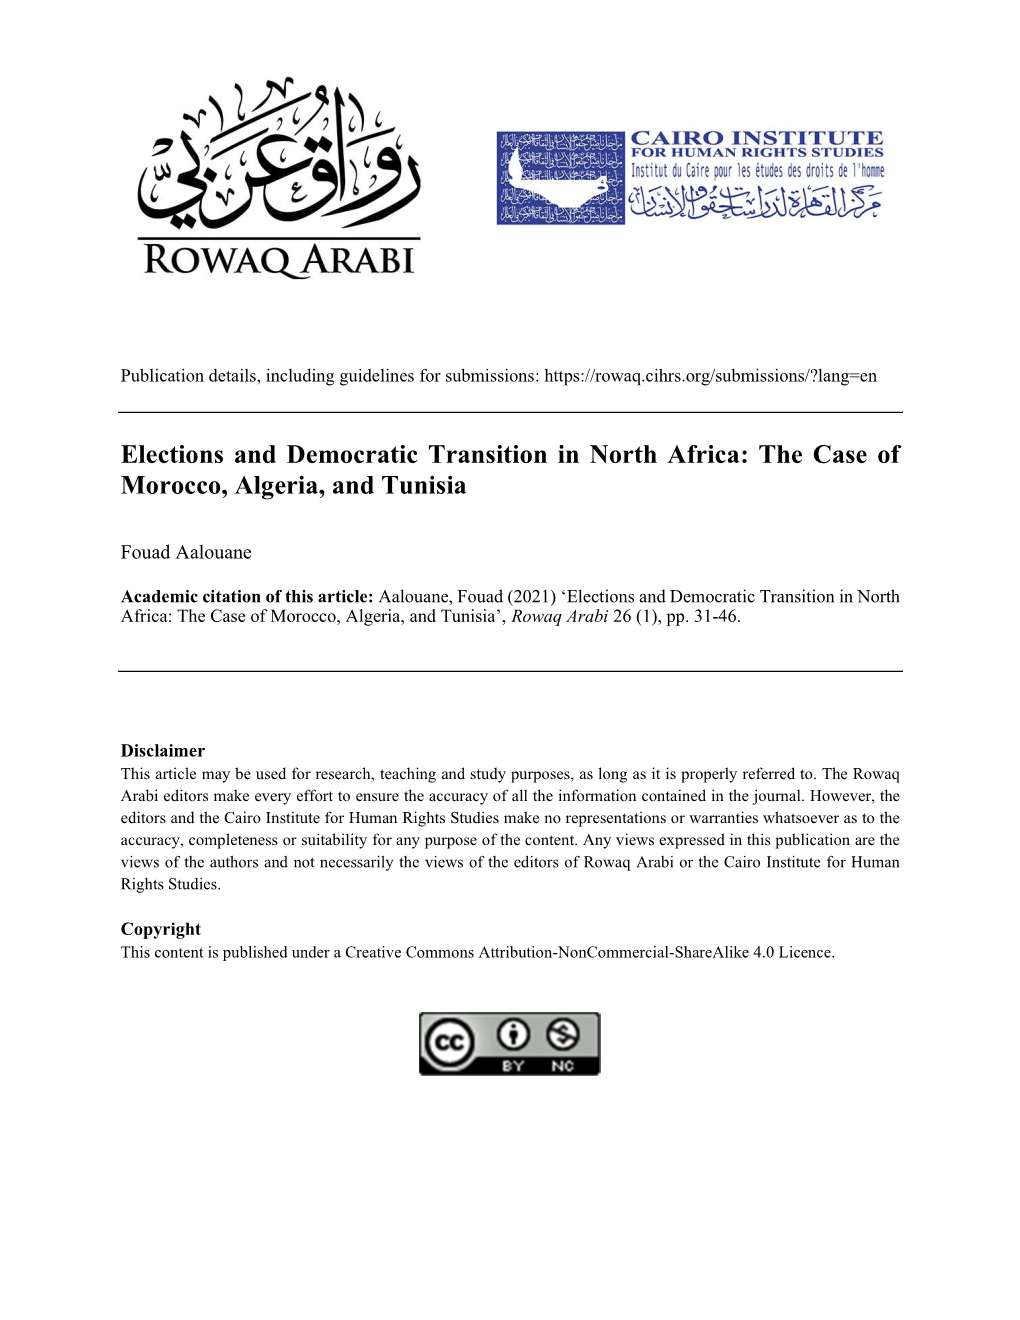 Elections and Democratic Transition in North Africa: the Case of Morocco, Algeria, and Tunisia